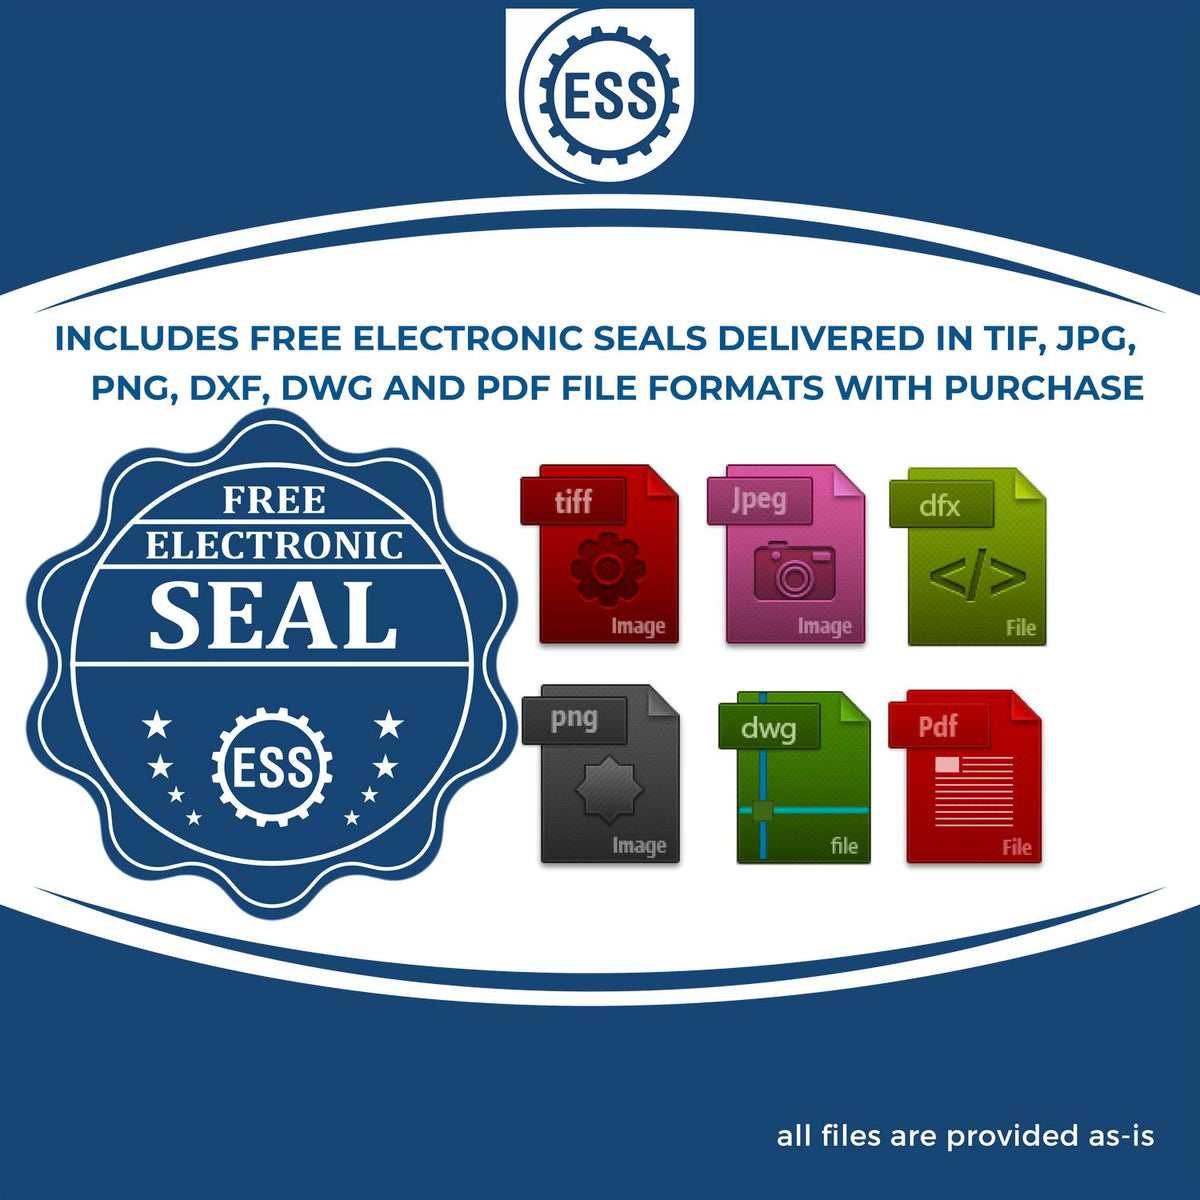 An infographic for the free electronic seal for the Long Reach Kentucky PE Seal illustrating the different file type icons such as DXF, DWG, TIF, JPG and PNG.